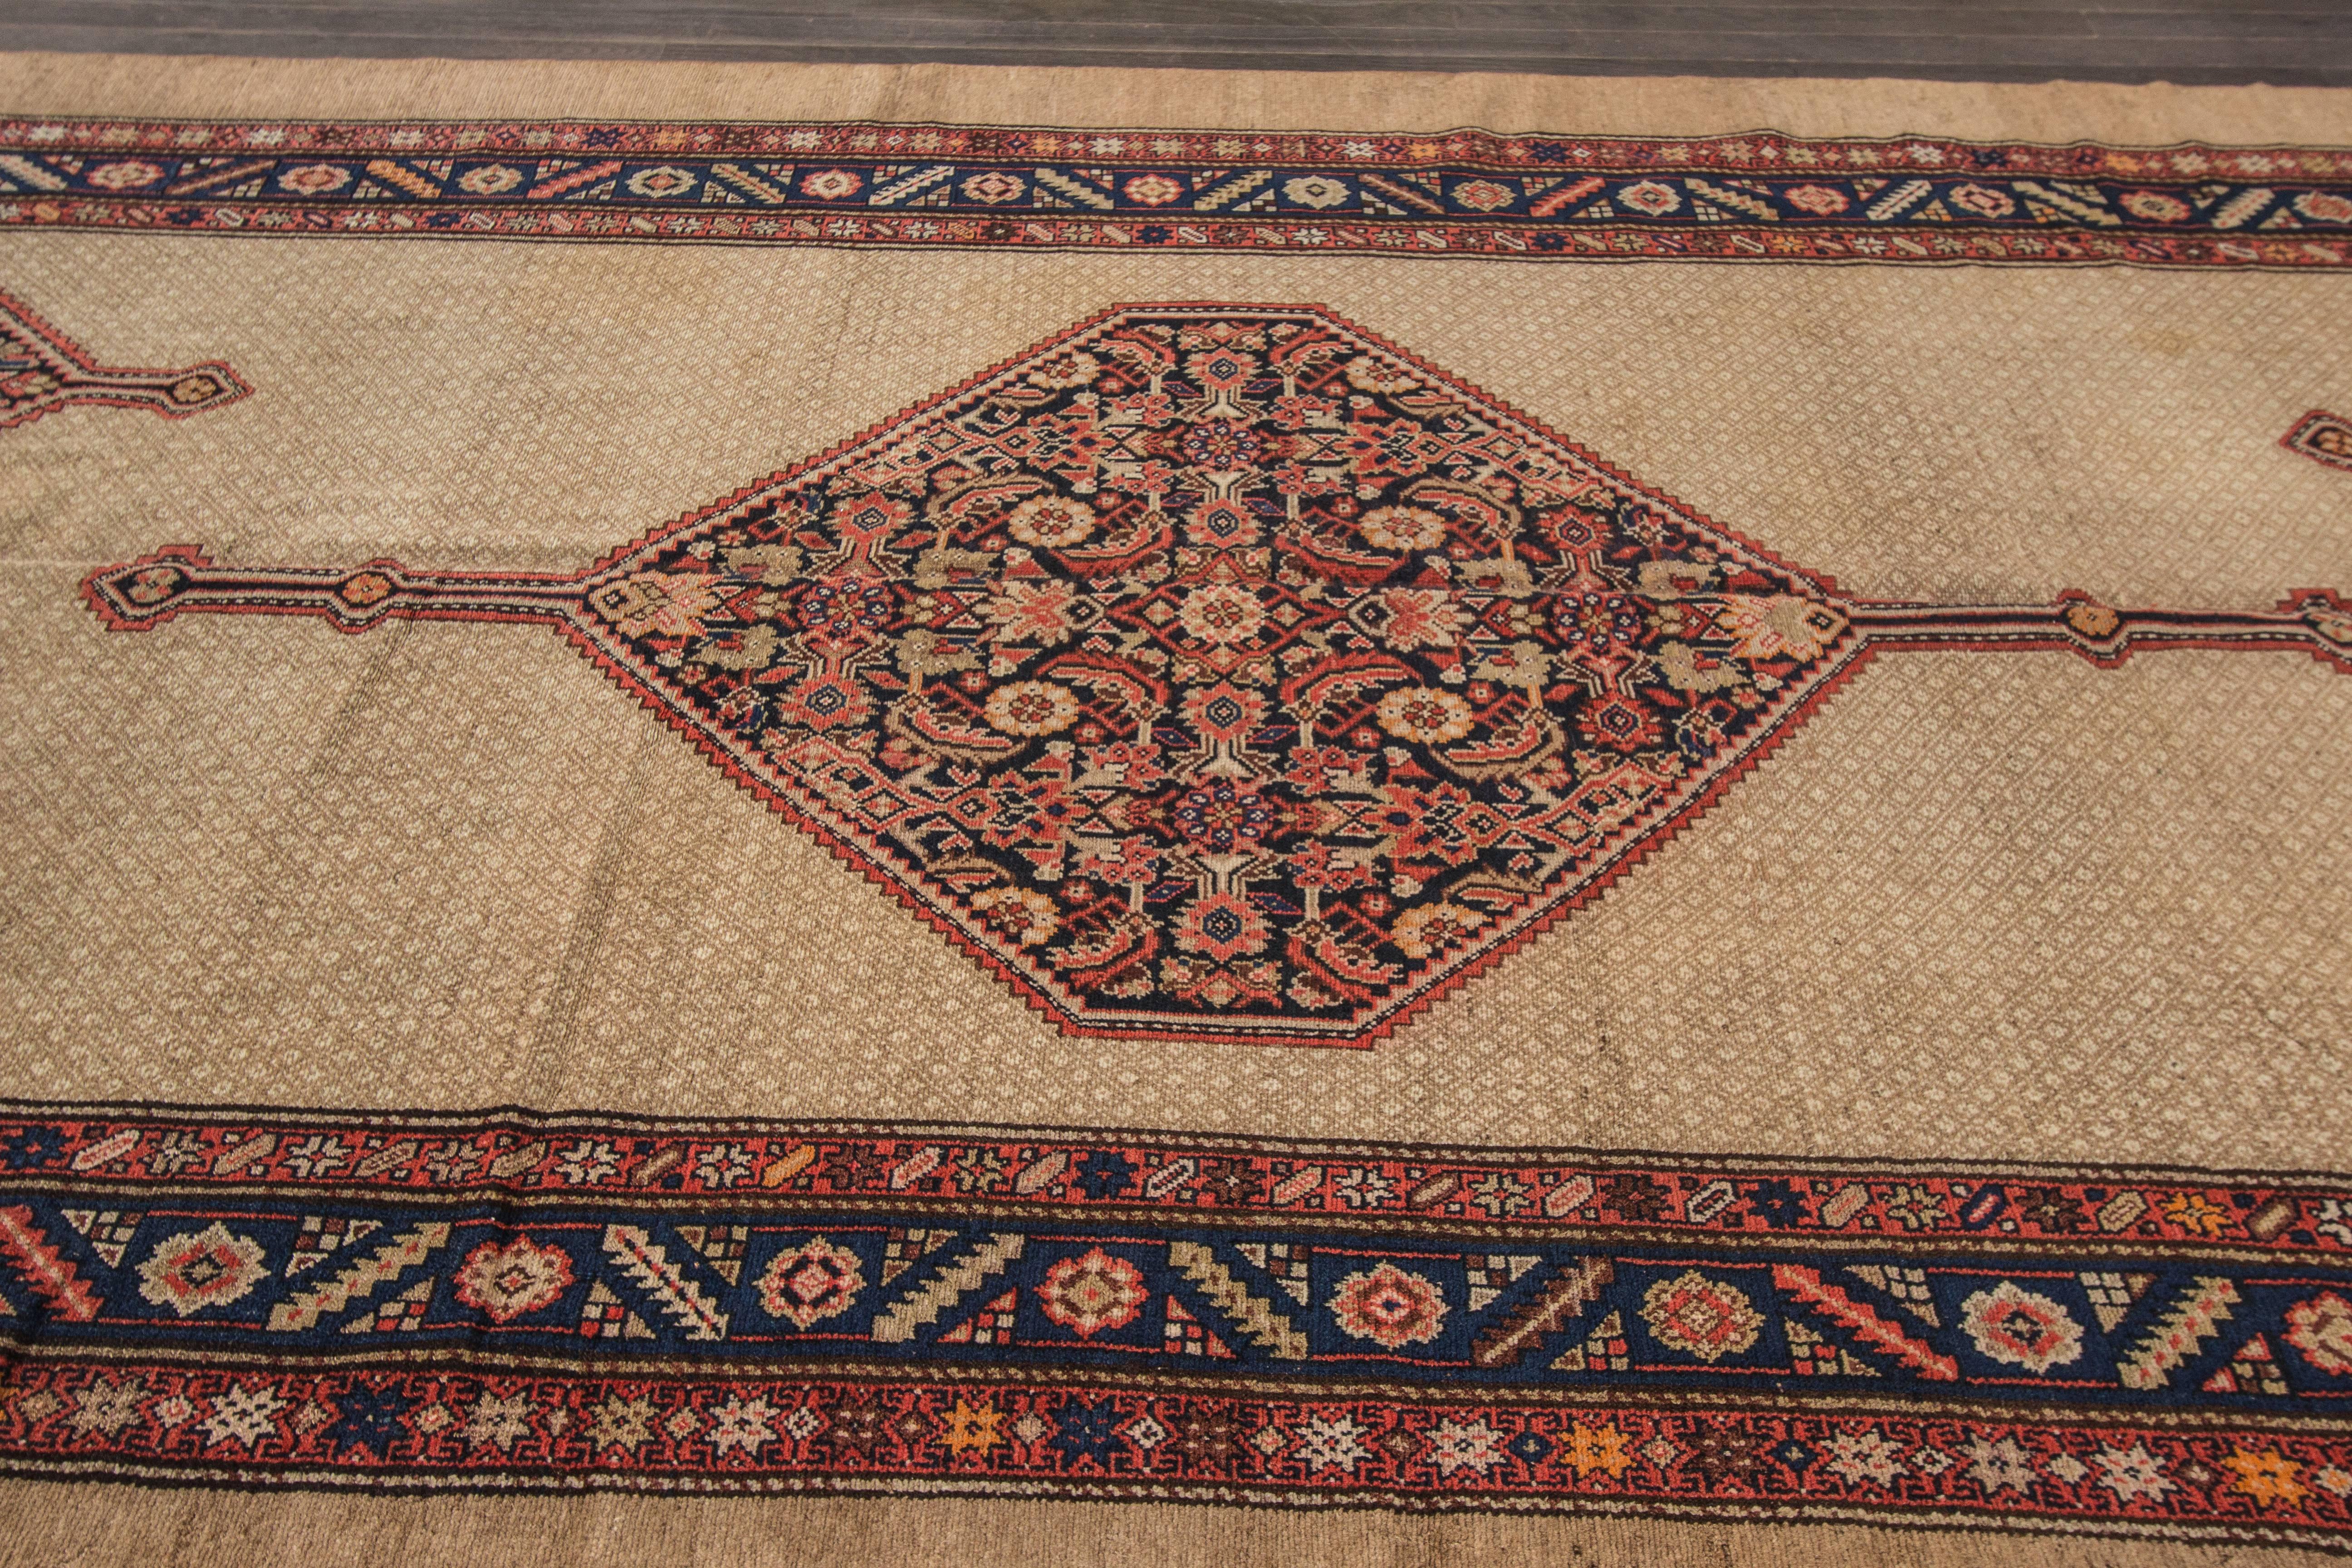 This charming village rug was woven in the vicinity of Hamadan in western Persia at the turn of the century. This format with a field of design peering out from a camel ground is reminiscent of neighbouring Serab pieces from the region. The